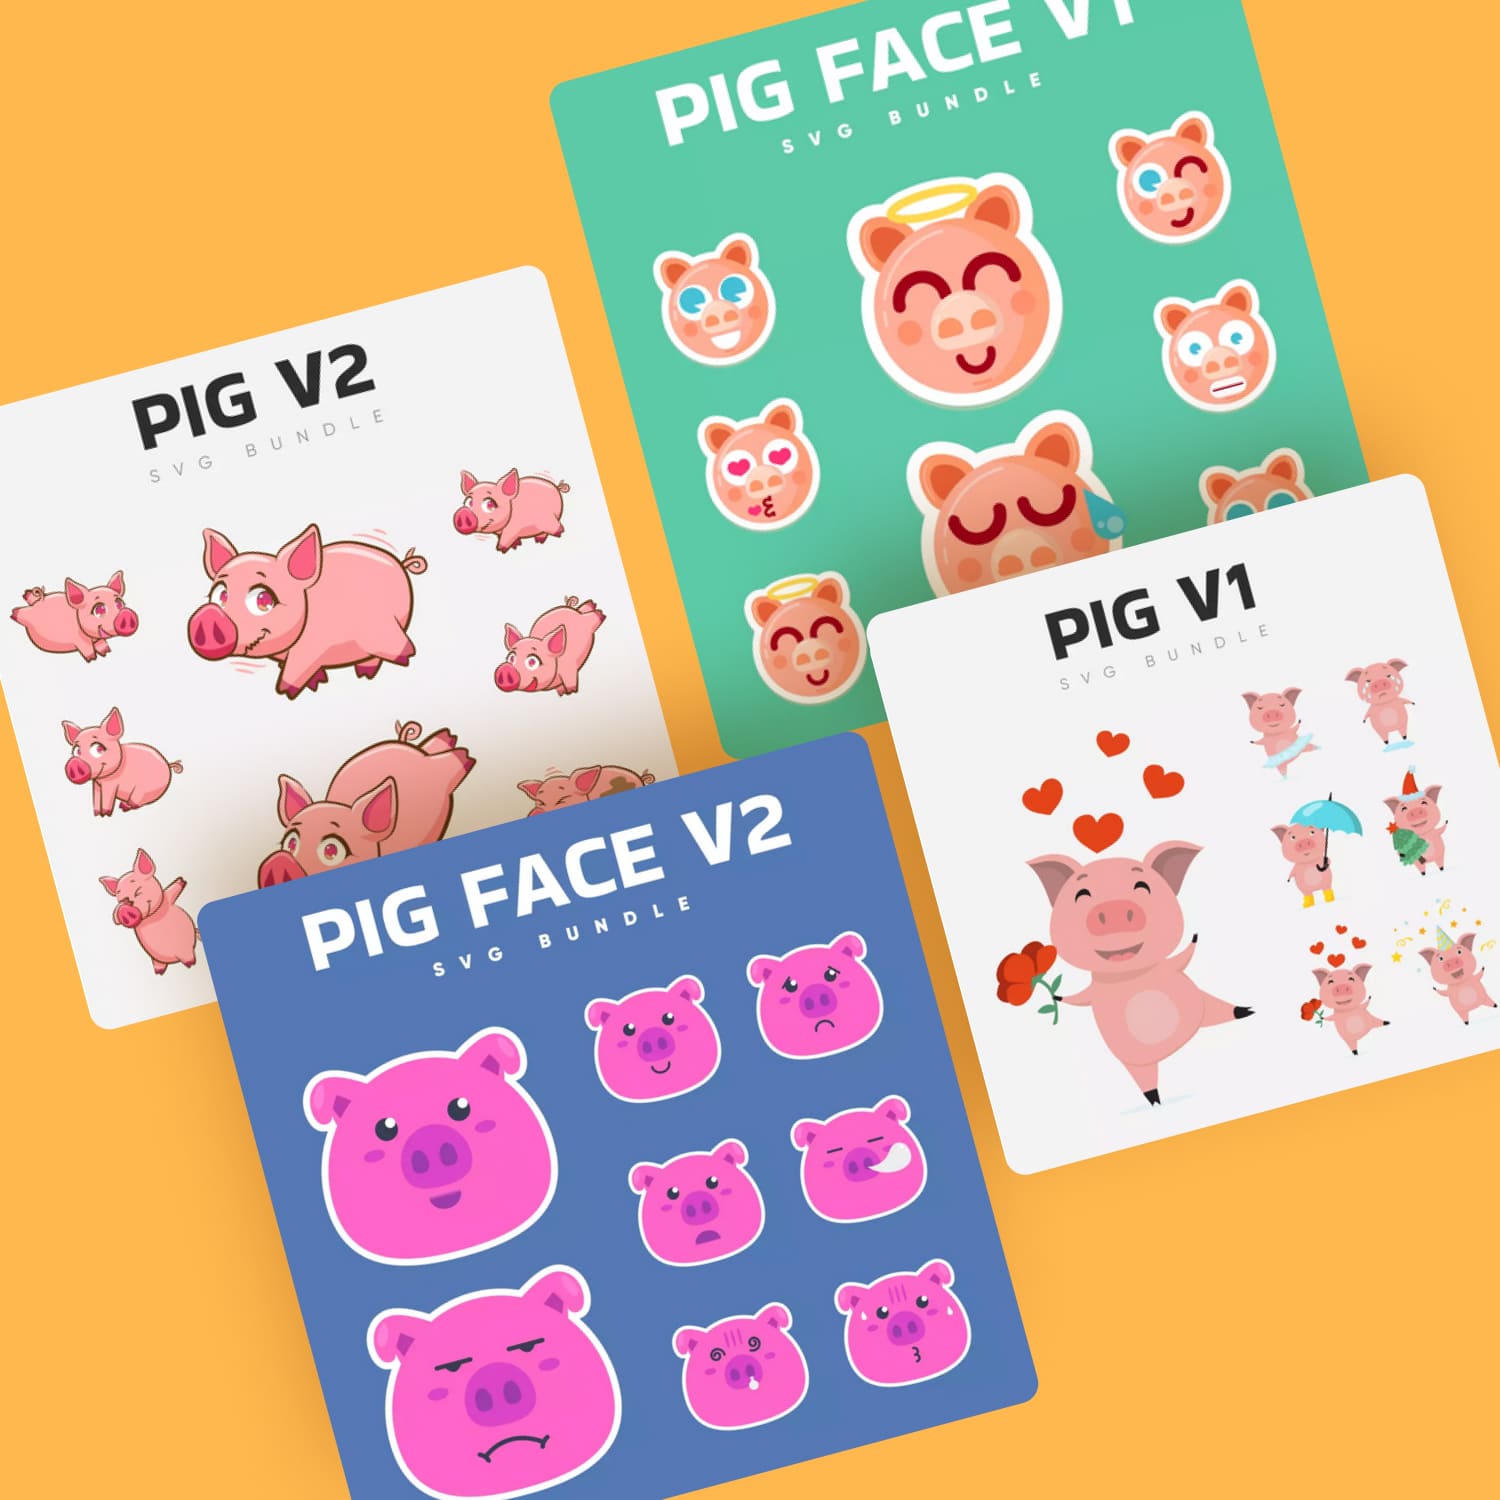 Three pig face stickers on a yellow background.